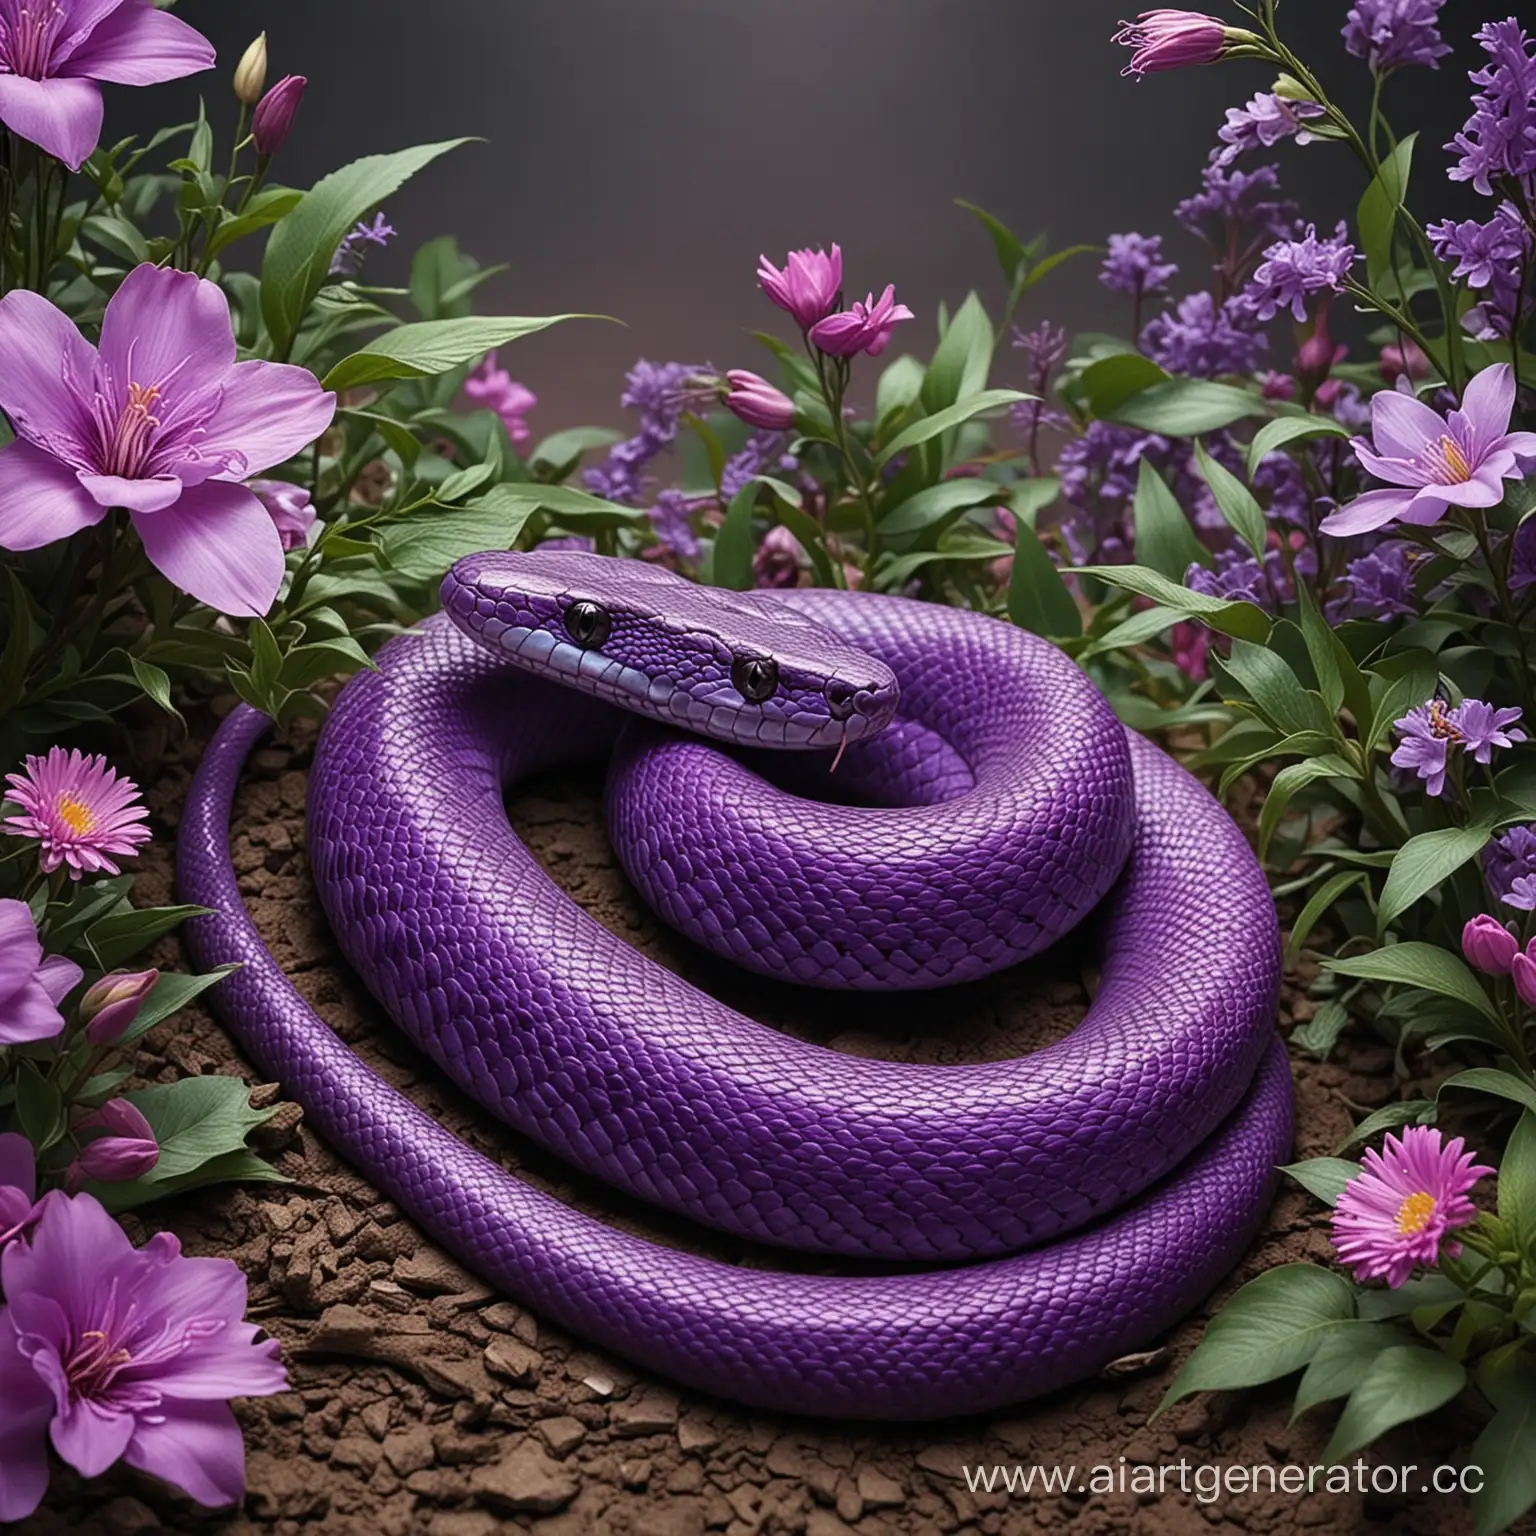 Vibrant-Purple-Snake-in-a-Lush-Garden-with-Flowers-and-Greenery